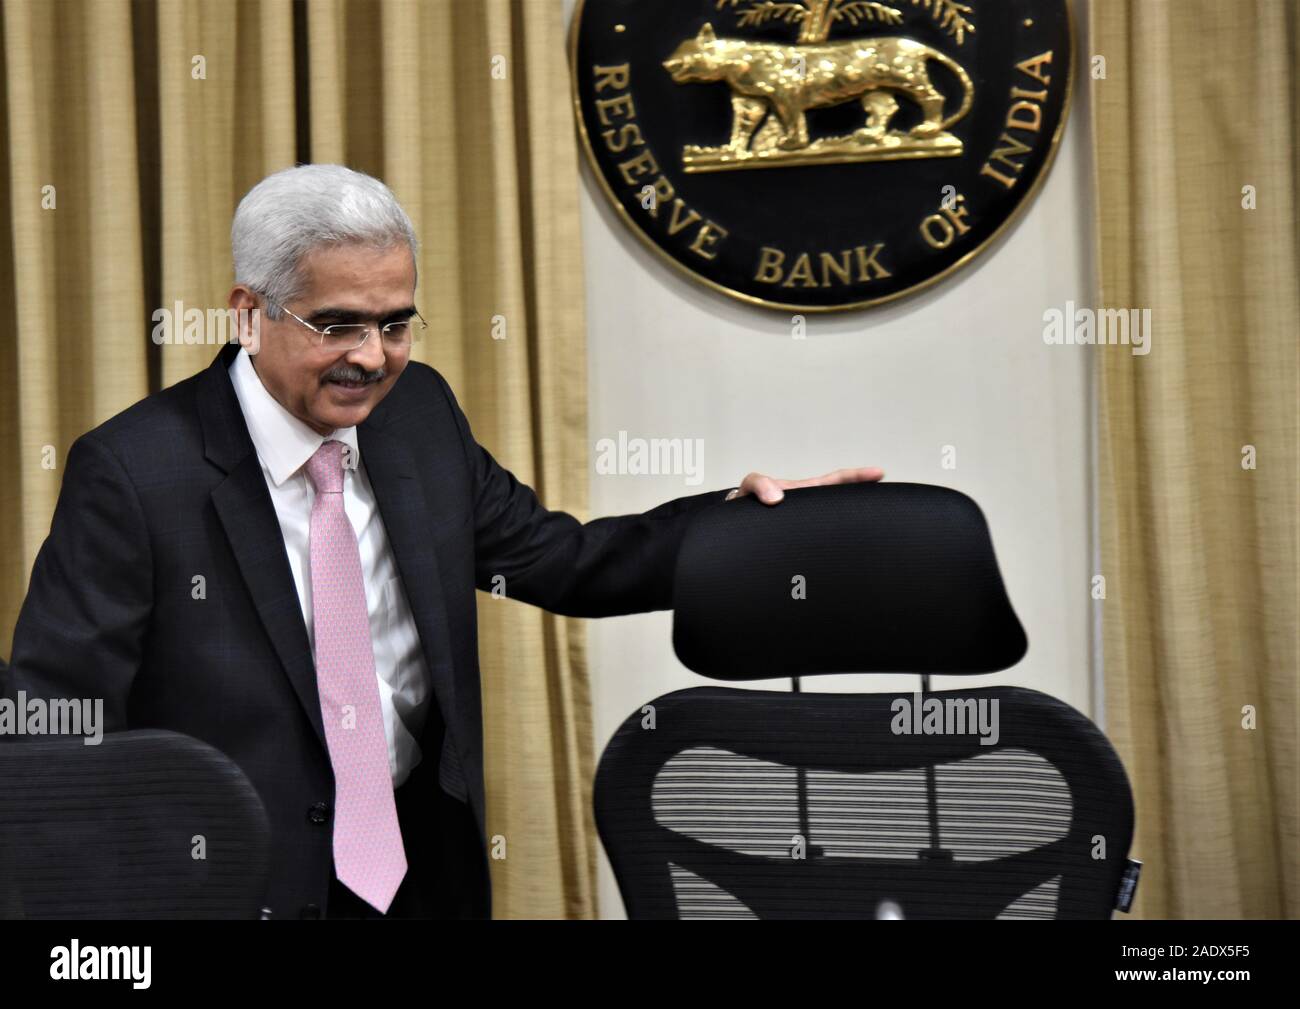 Mumbai, India. 5th Dec, 2019. Shaktikanta Das, governor of the Reserve Bank of India (RBI), arrives for a press conference at the RBI head office in Mumbai, India, Dec. 5, 2019. India's Central Bank announced to maintain the repo rate unchanged at 5.15 percent on Thursday, giving priority to control inflation rather than the diminishing growth in Asia's third largest economy. The statement was made after the country's Reserve Bank of India's Monetary Policy Committee (MPC) concluded its two-day meeting on Thursday. Credit: Fariha Farooqui/Xinhua/Alamy Live News Stock Photo